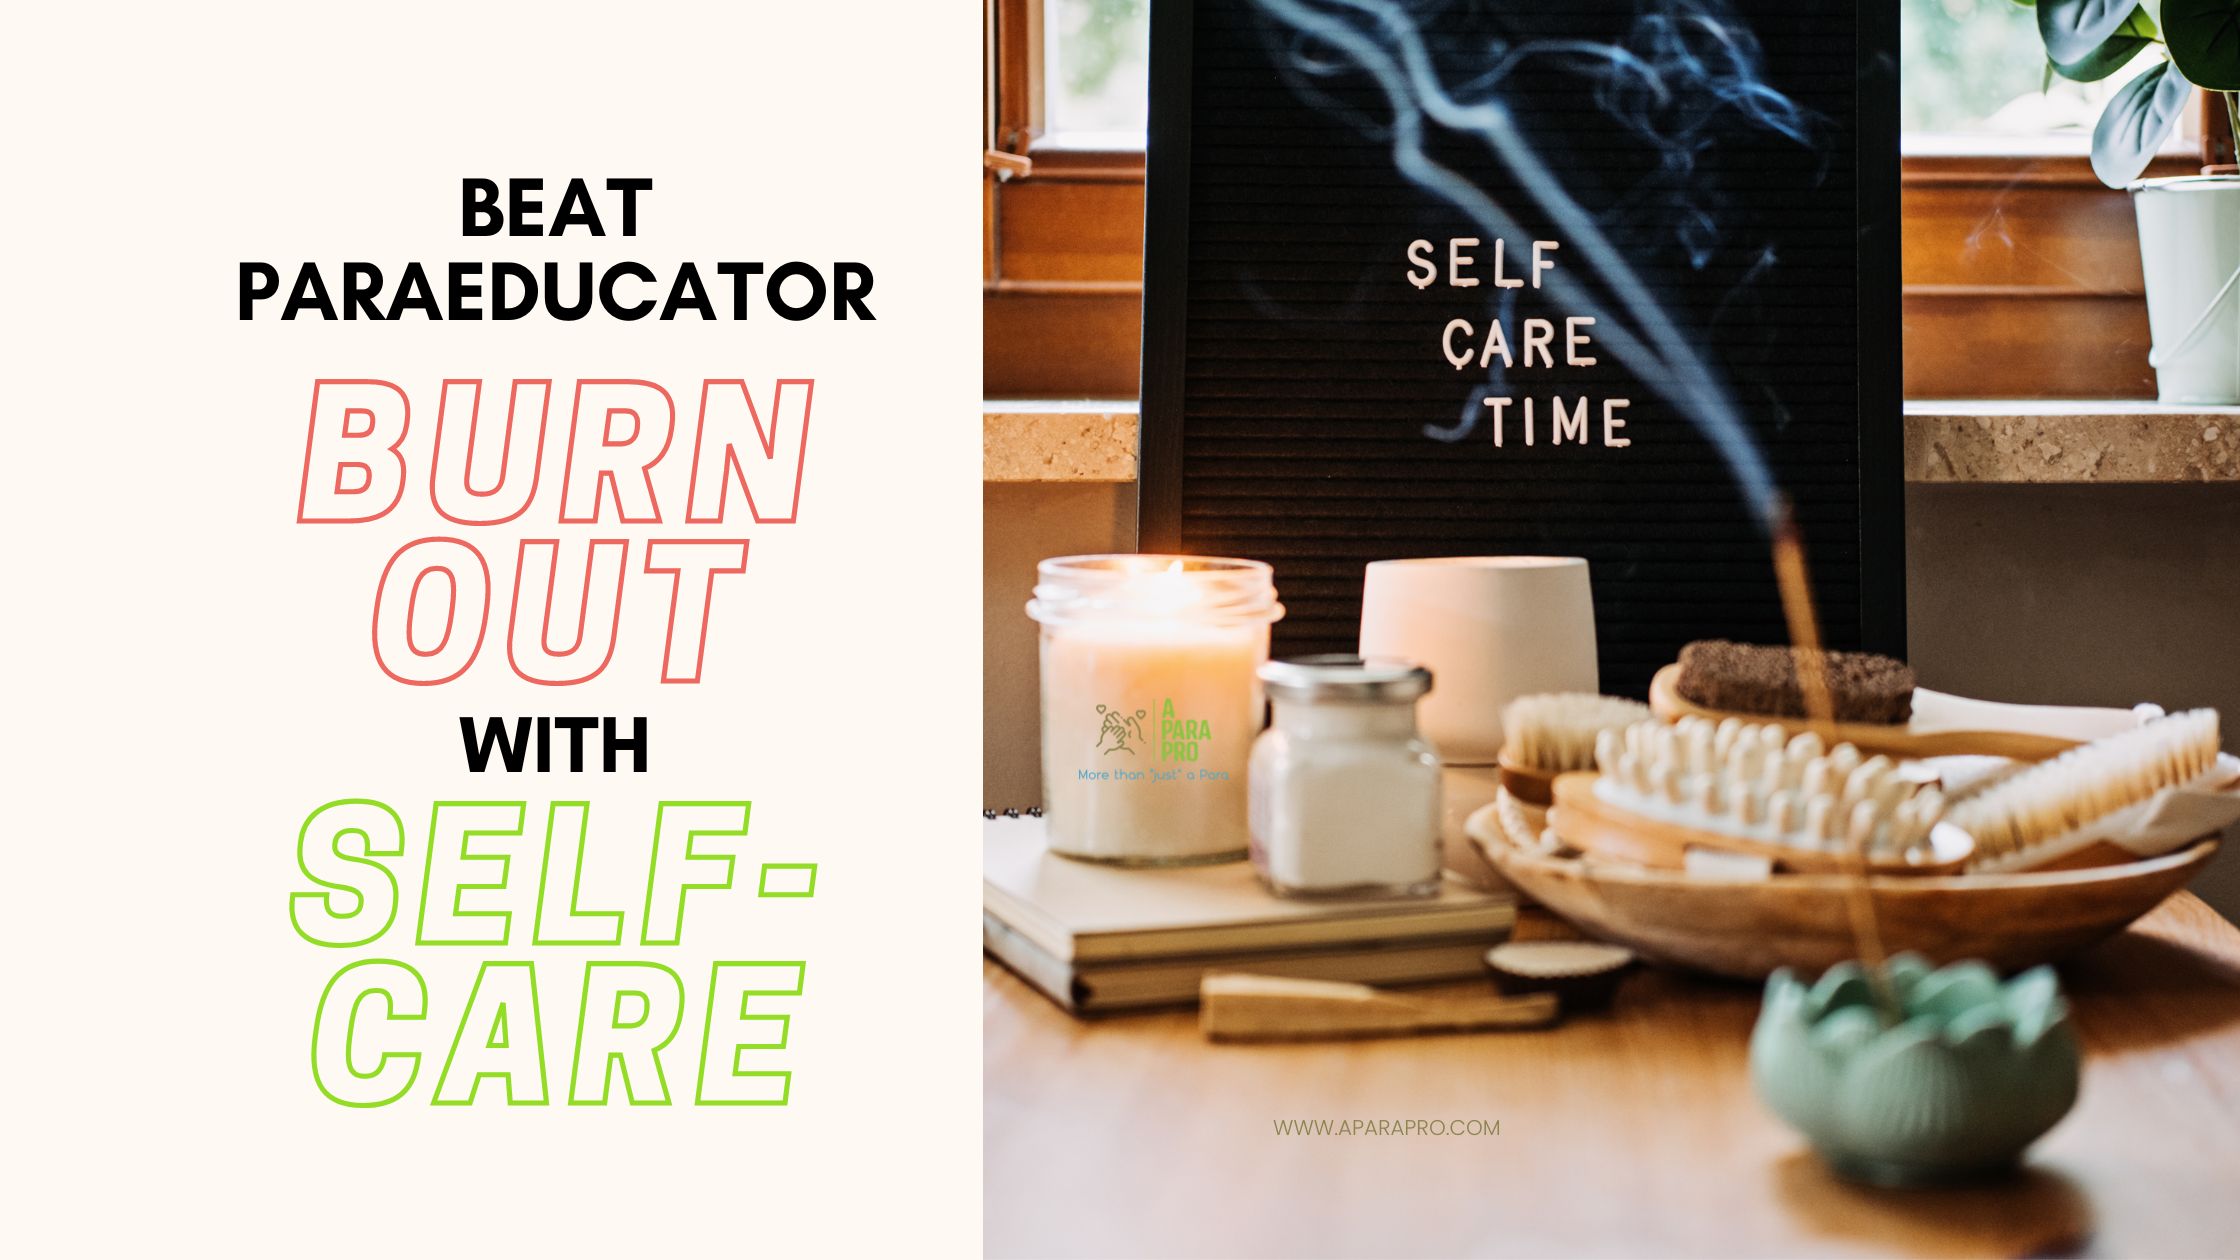 Paraeducator-Burn-Out-Featured-Image-for-A-Para-Pro